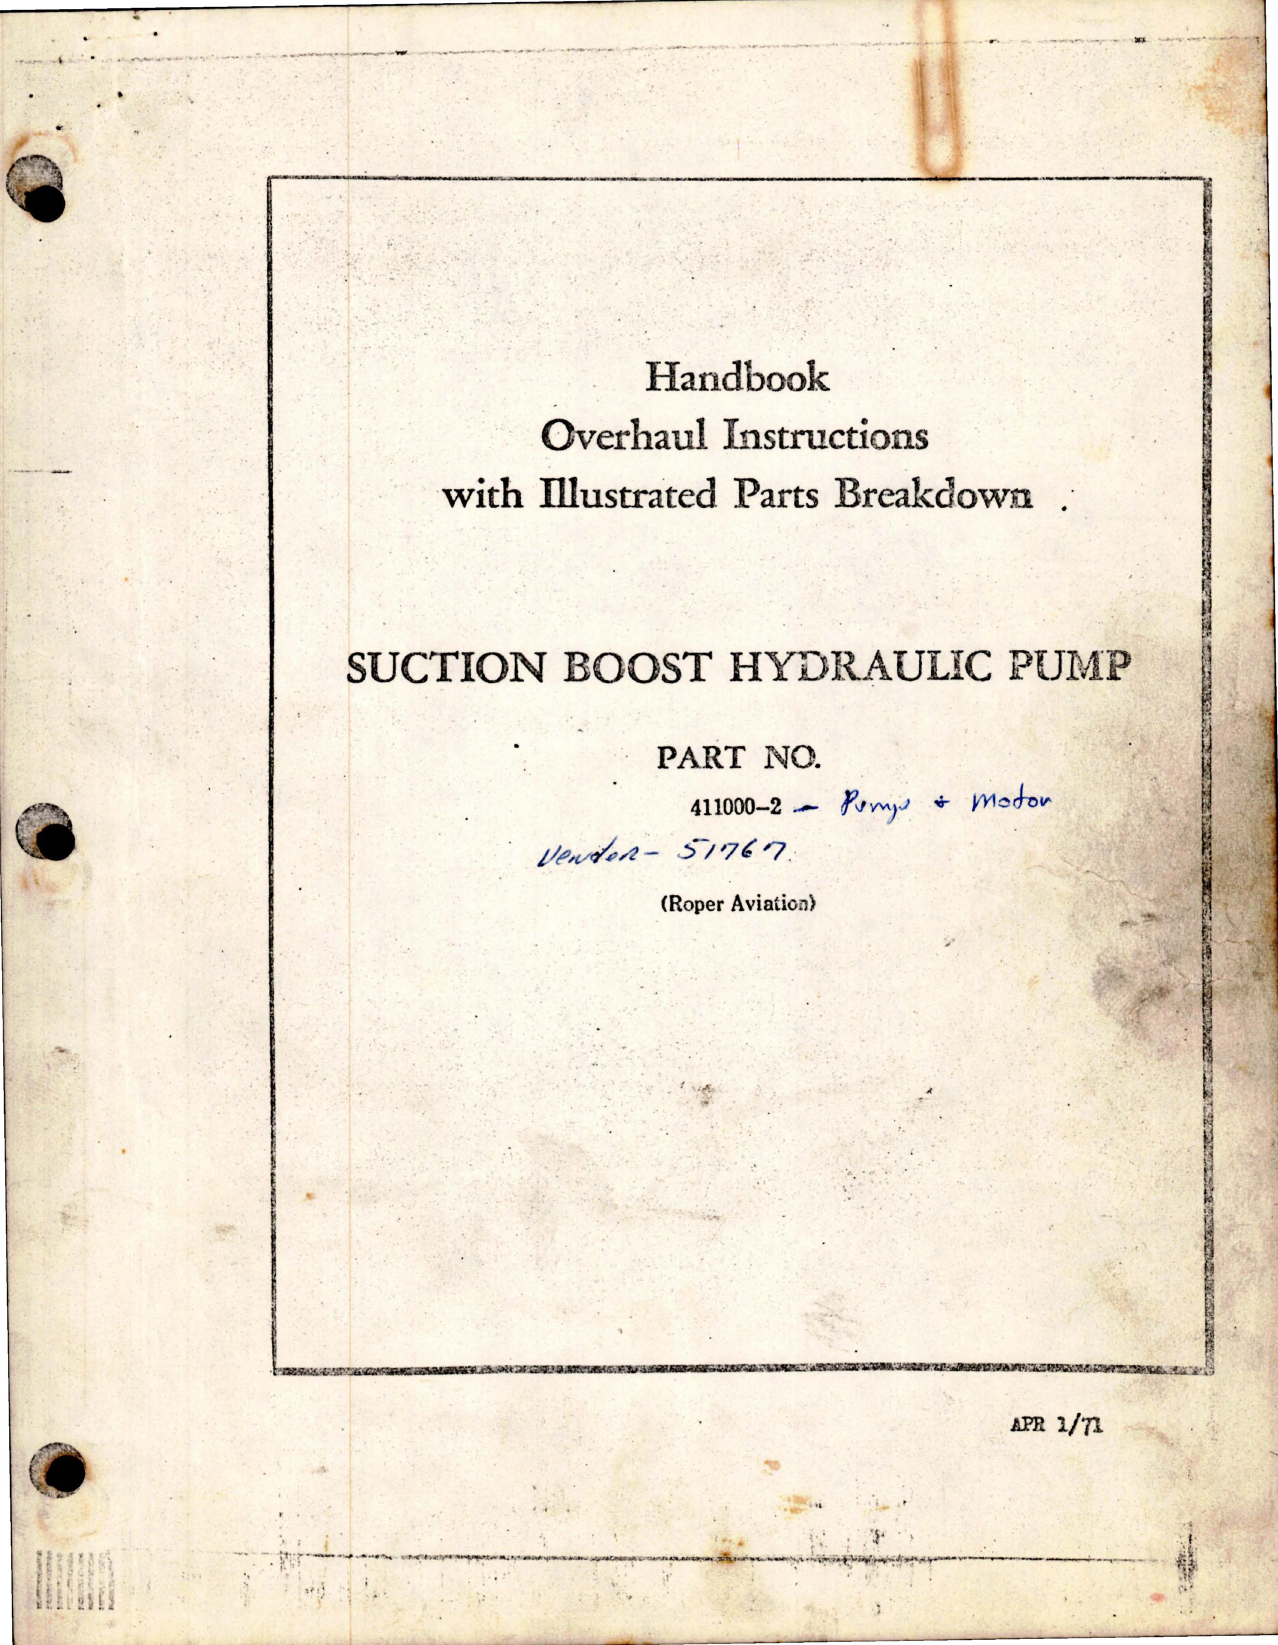 Sample page 1 from AirCorps Library document: Overhaul Instructions with Illustrated Parts Breakdown for Suction Boost Hydraulic Pump - Part 411000-2 